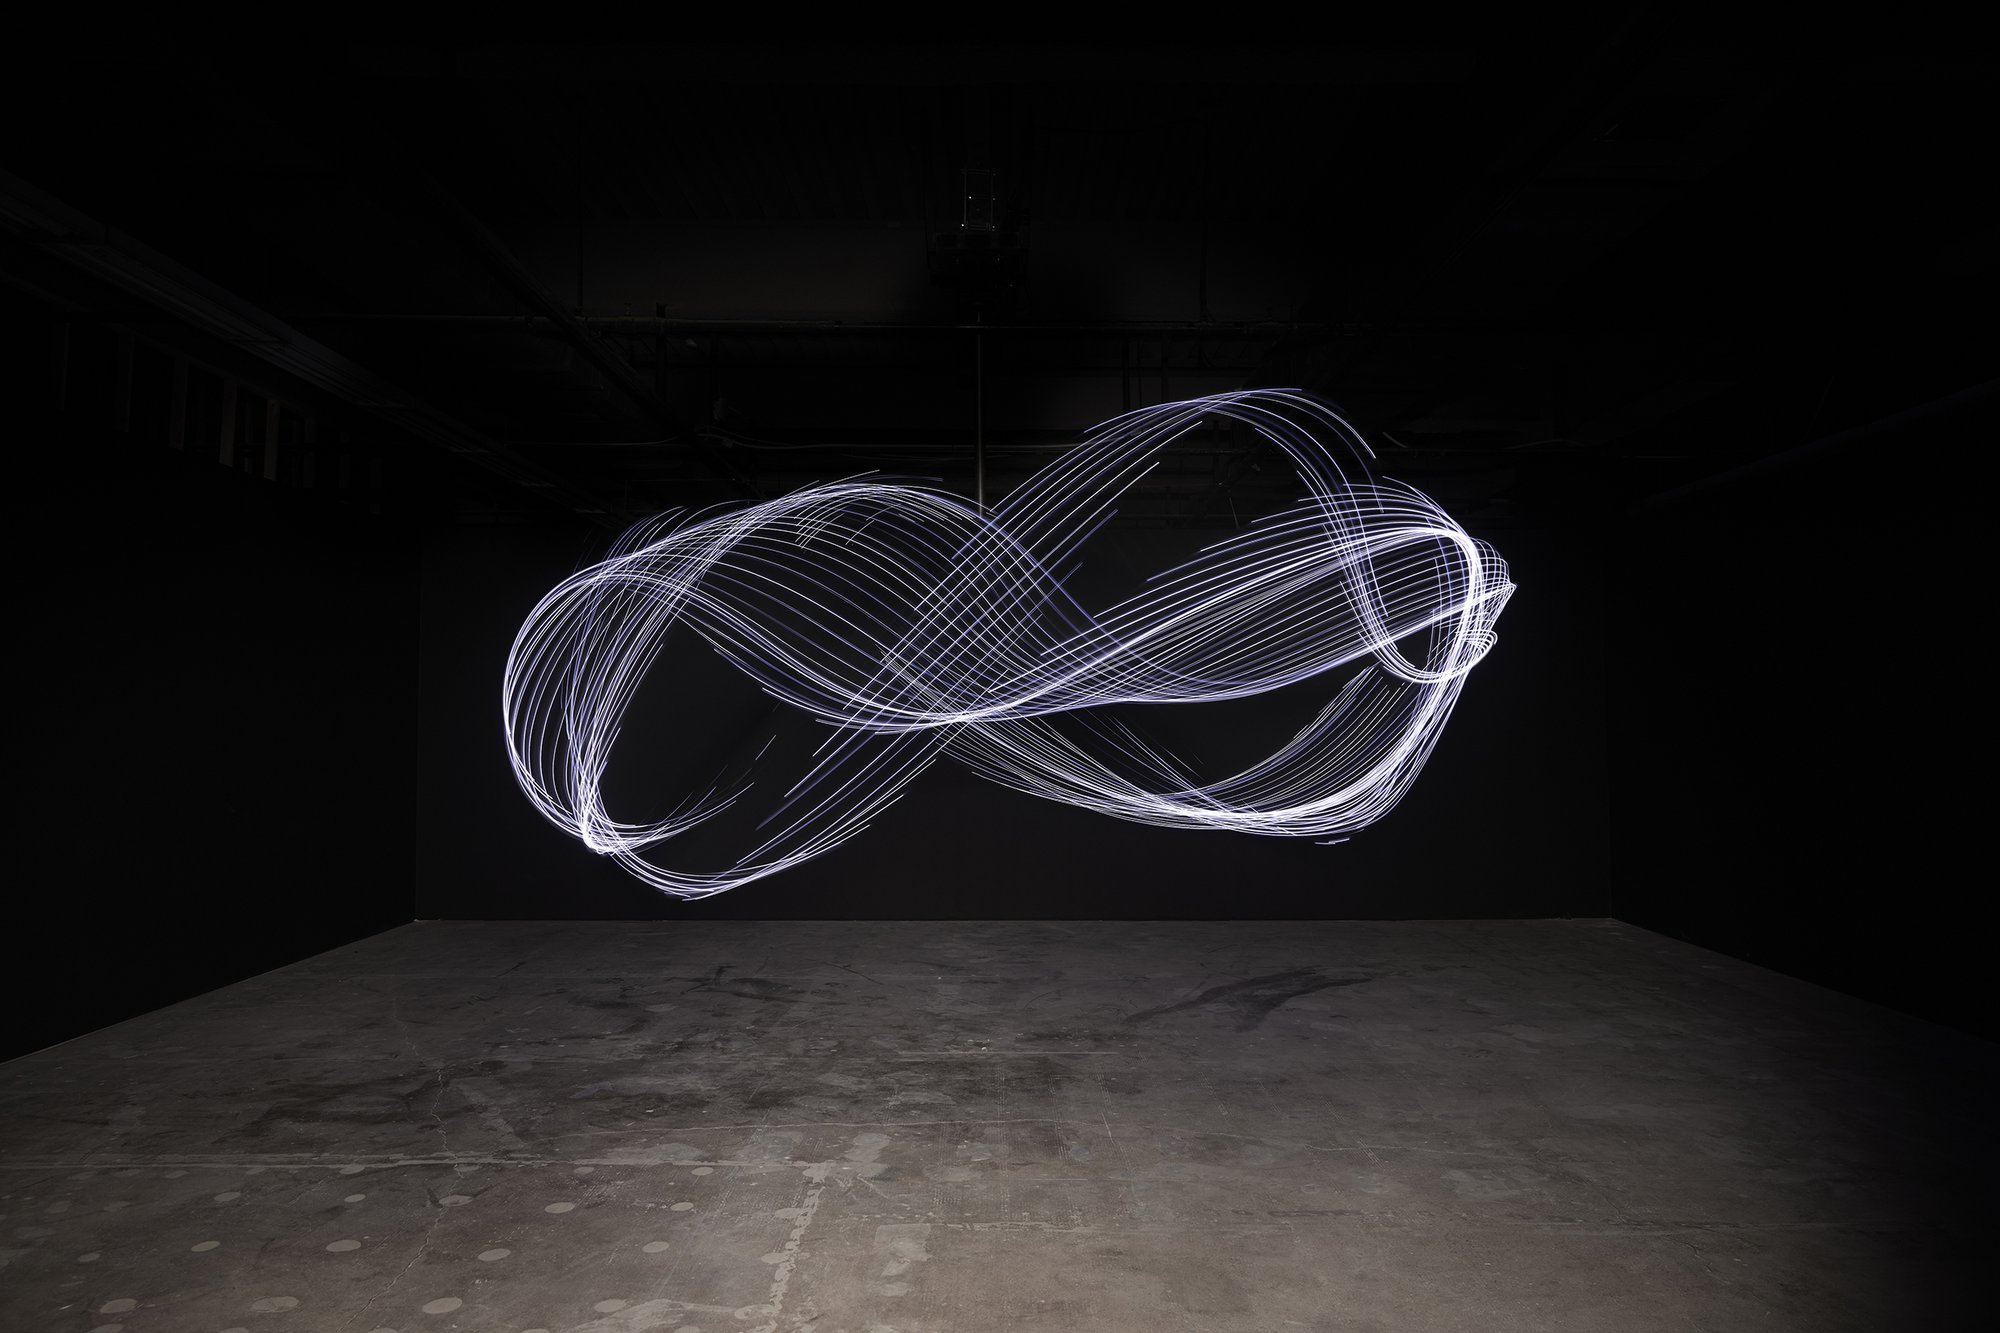 Liliane Lijn, Gravity’s Dance, black weighted cloth, LEDS, Forex central stiffener, 3 phase motor, inverter, control system, ∅ 600 cm (∅ 236 1/4 in), 2019